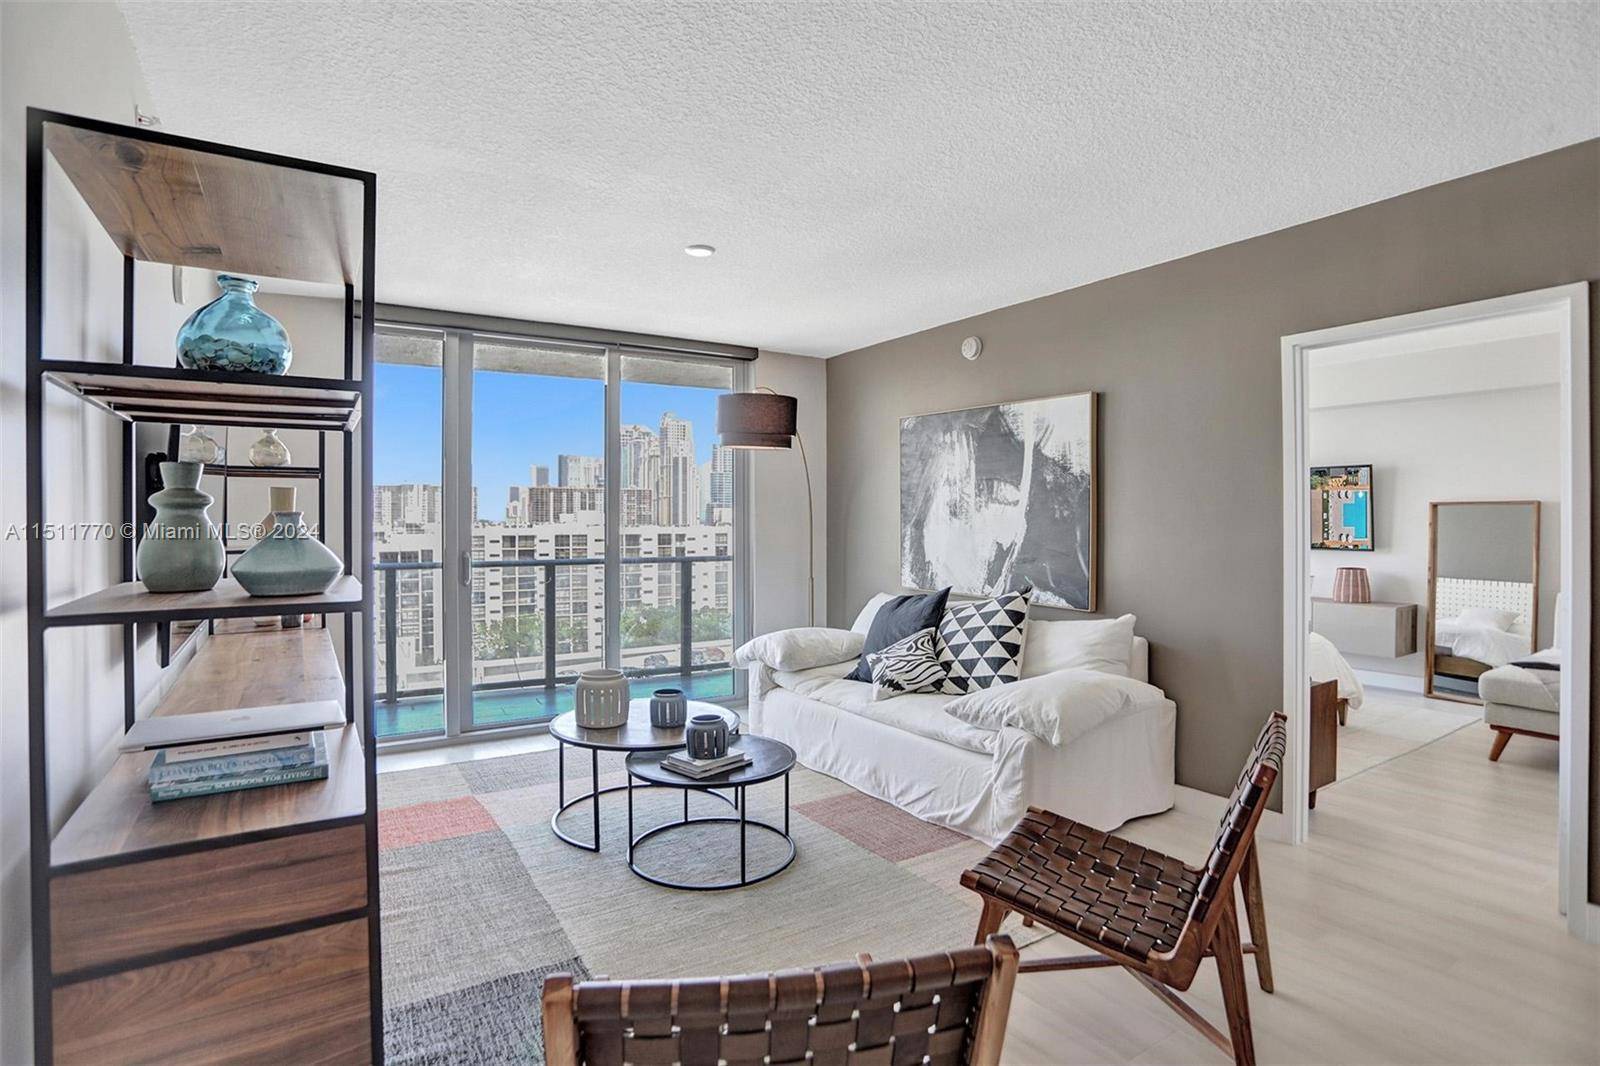 Spectacular move in ready 3bed, 3 baths situated in the city of Sunny Isles.